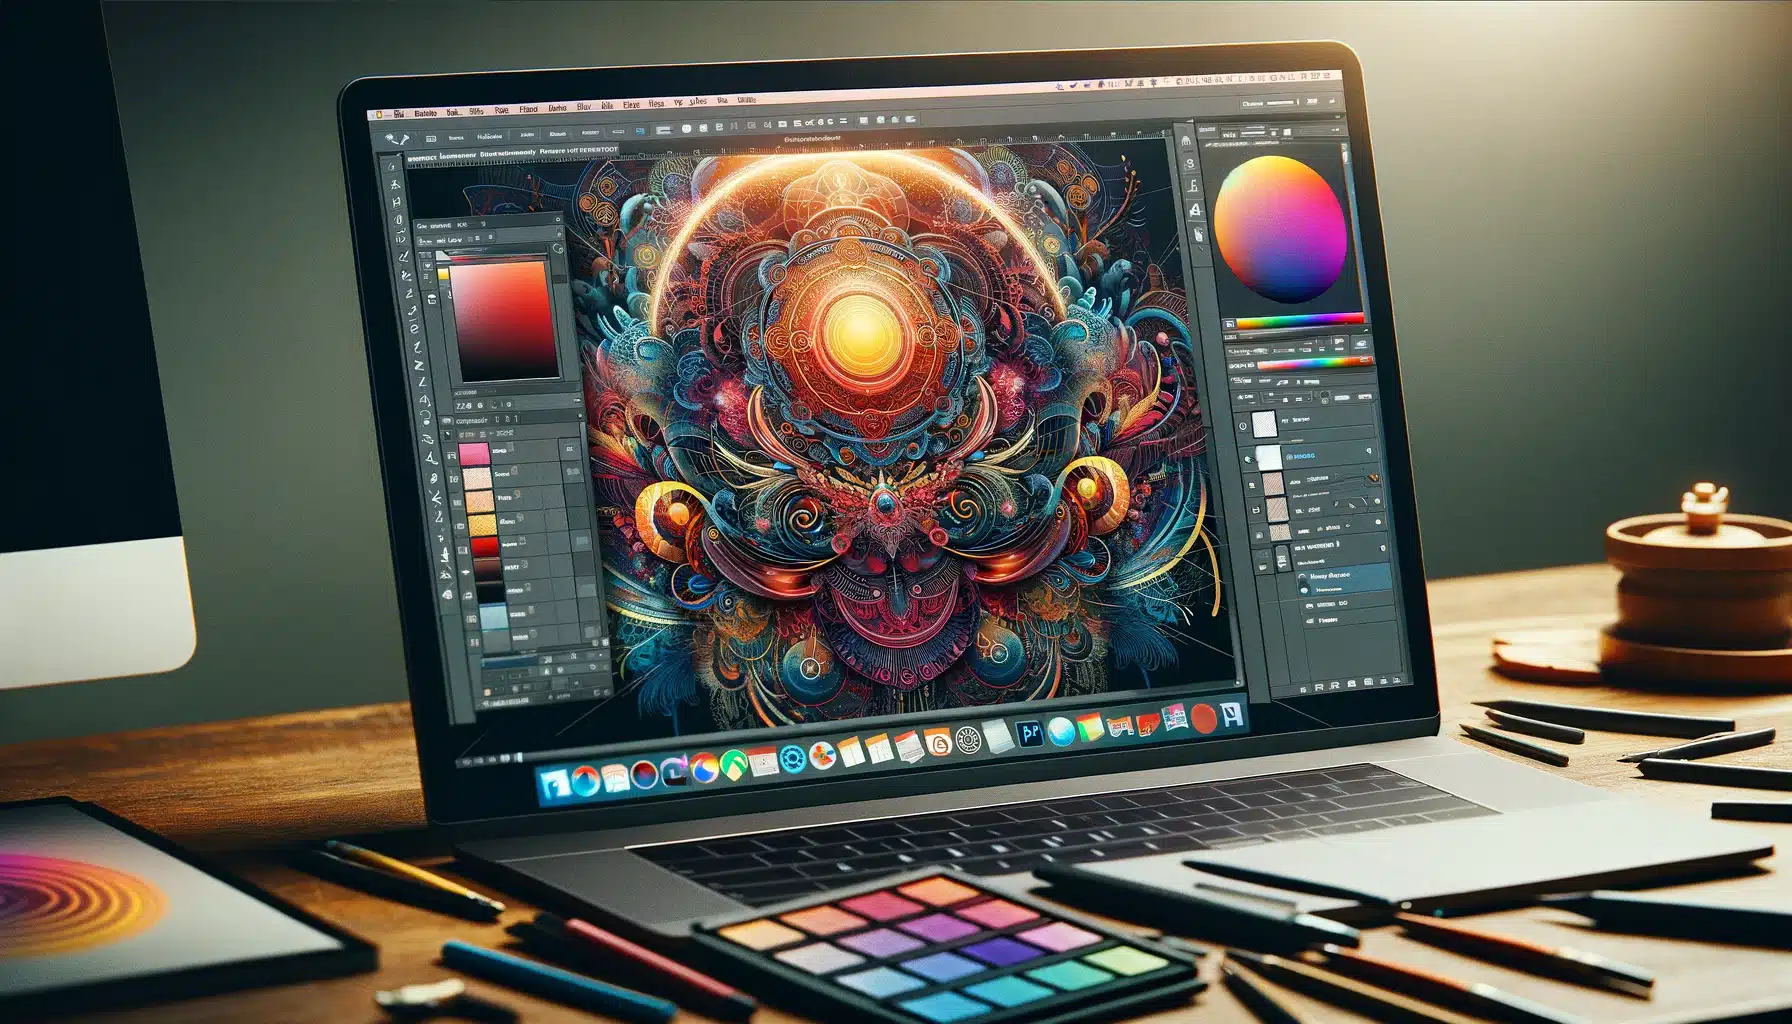 Adobe PS interface displaying a graphic design process with multiple layers and vibrant details.